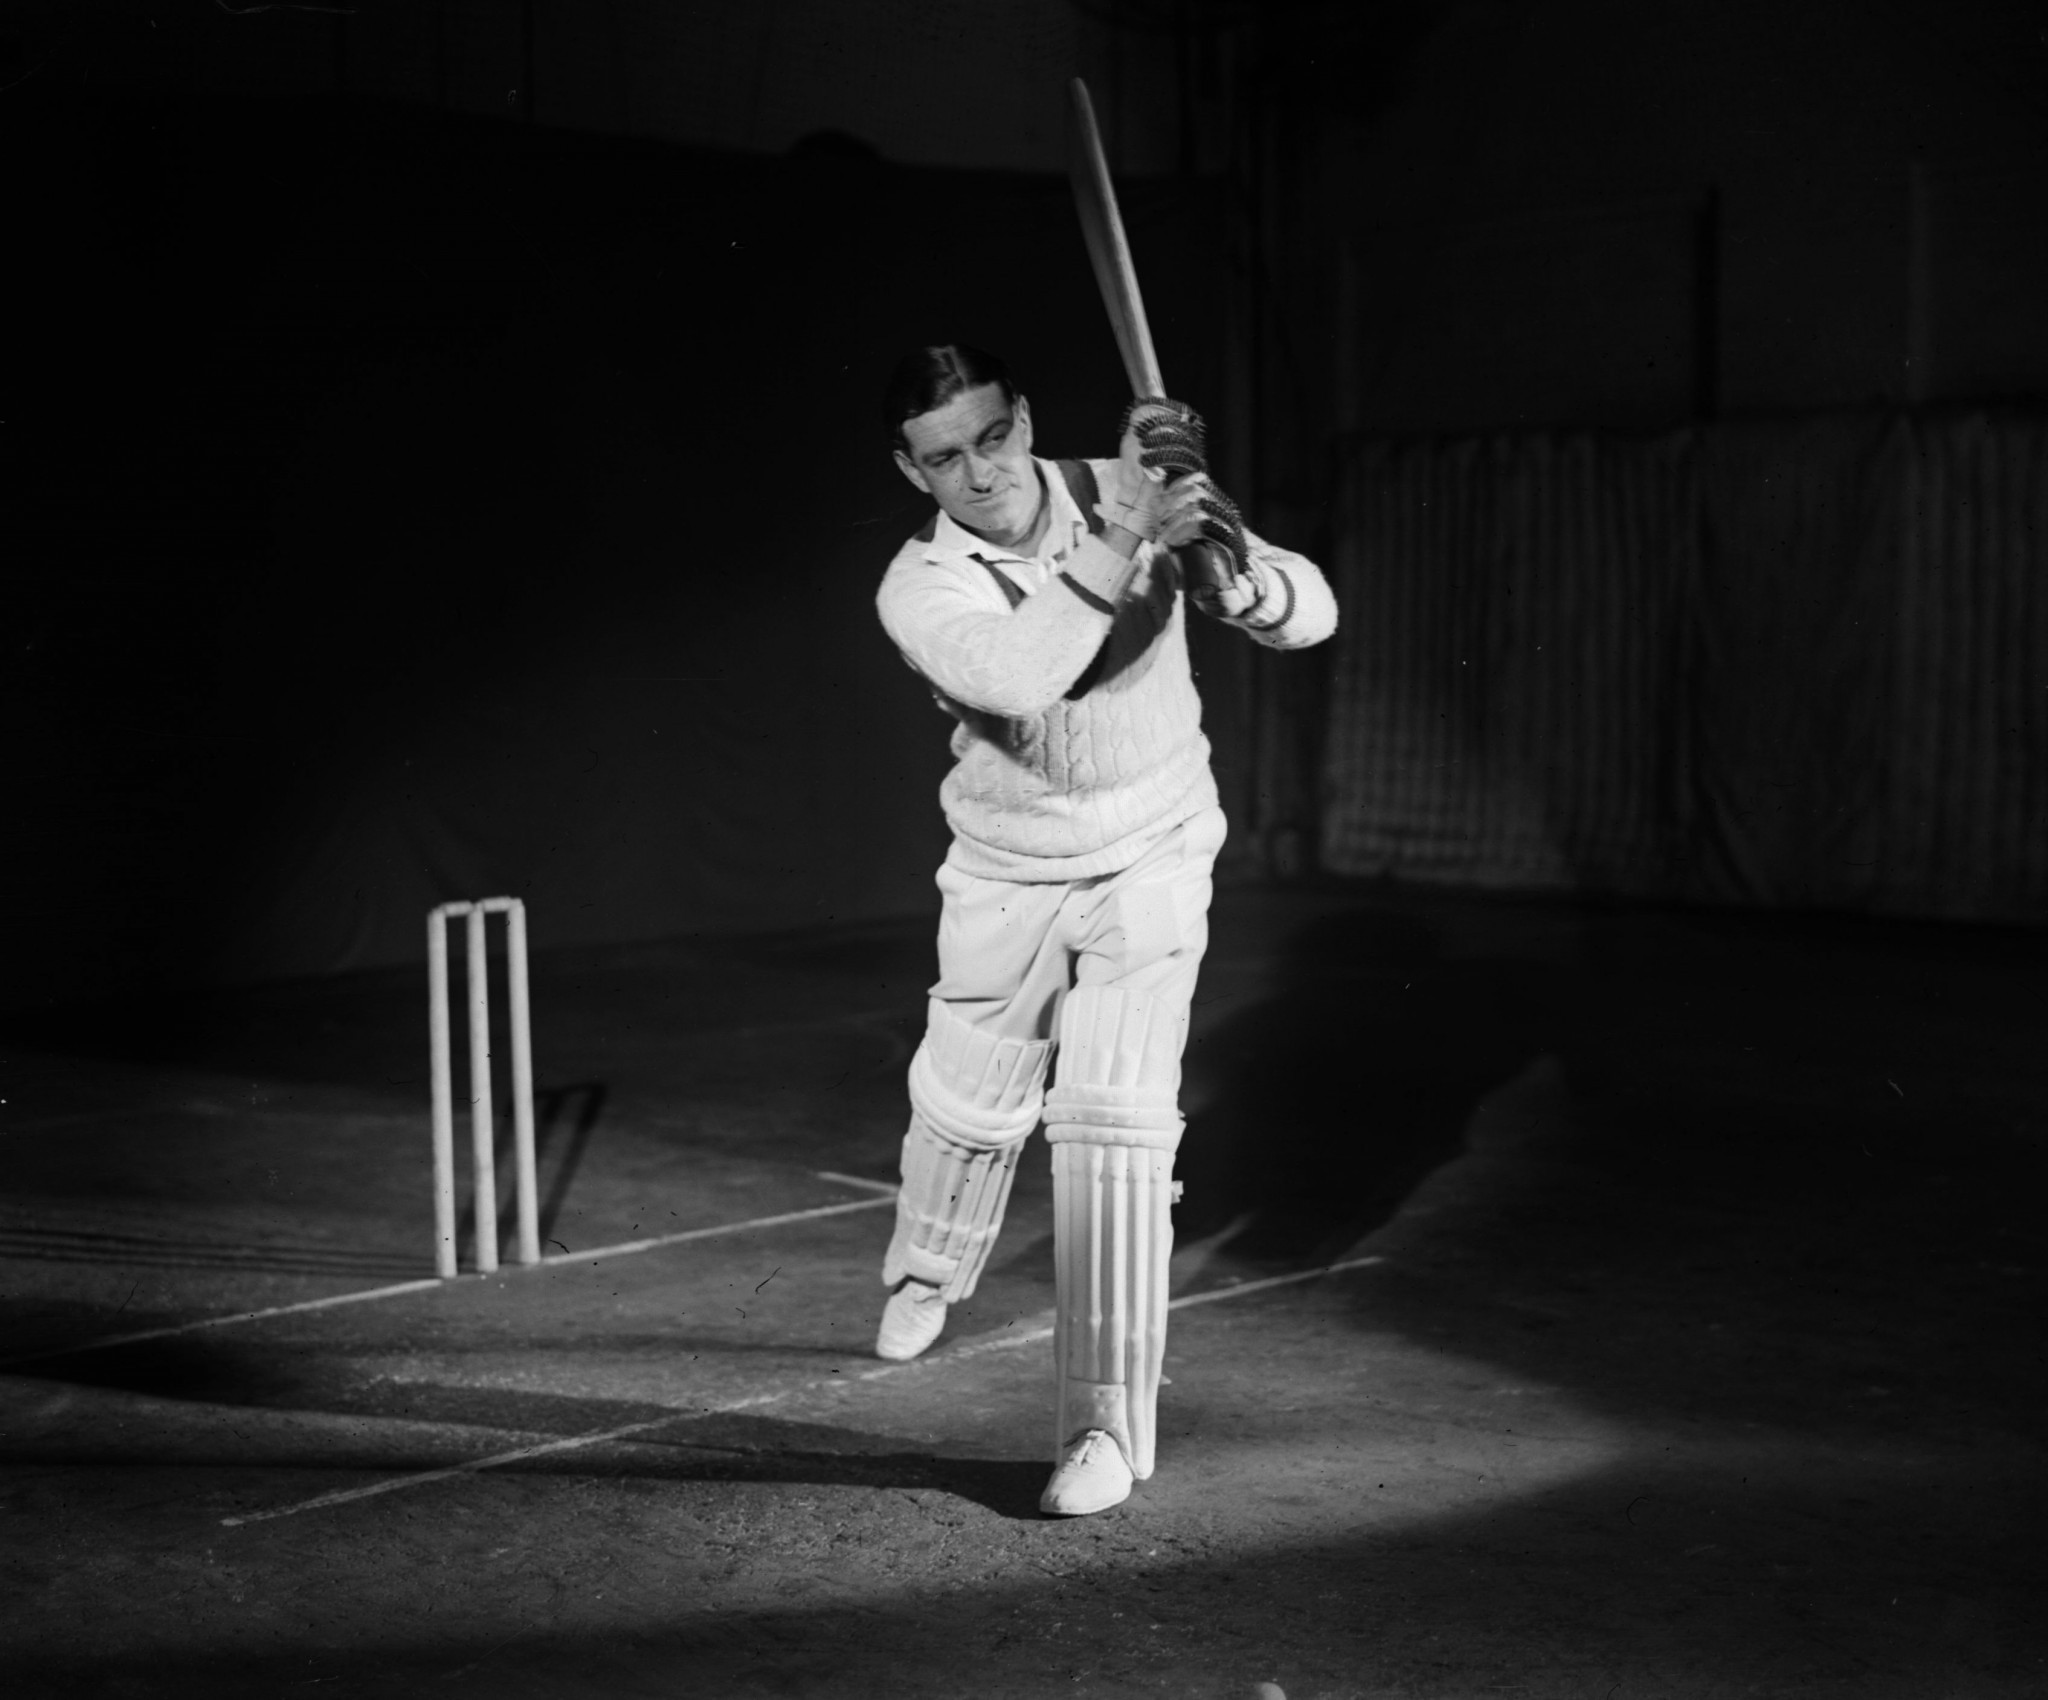 Walter Hammond was among the England players to set sail for South Africa, where a timeless Test match was played ©Getty Images